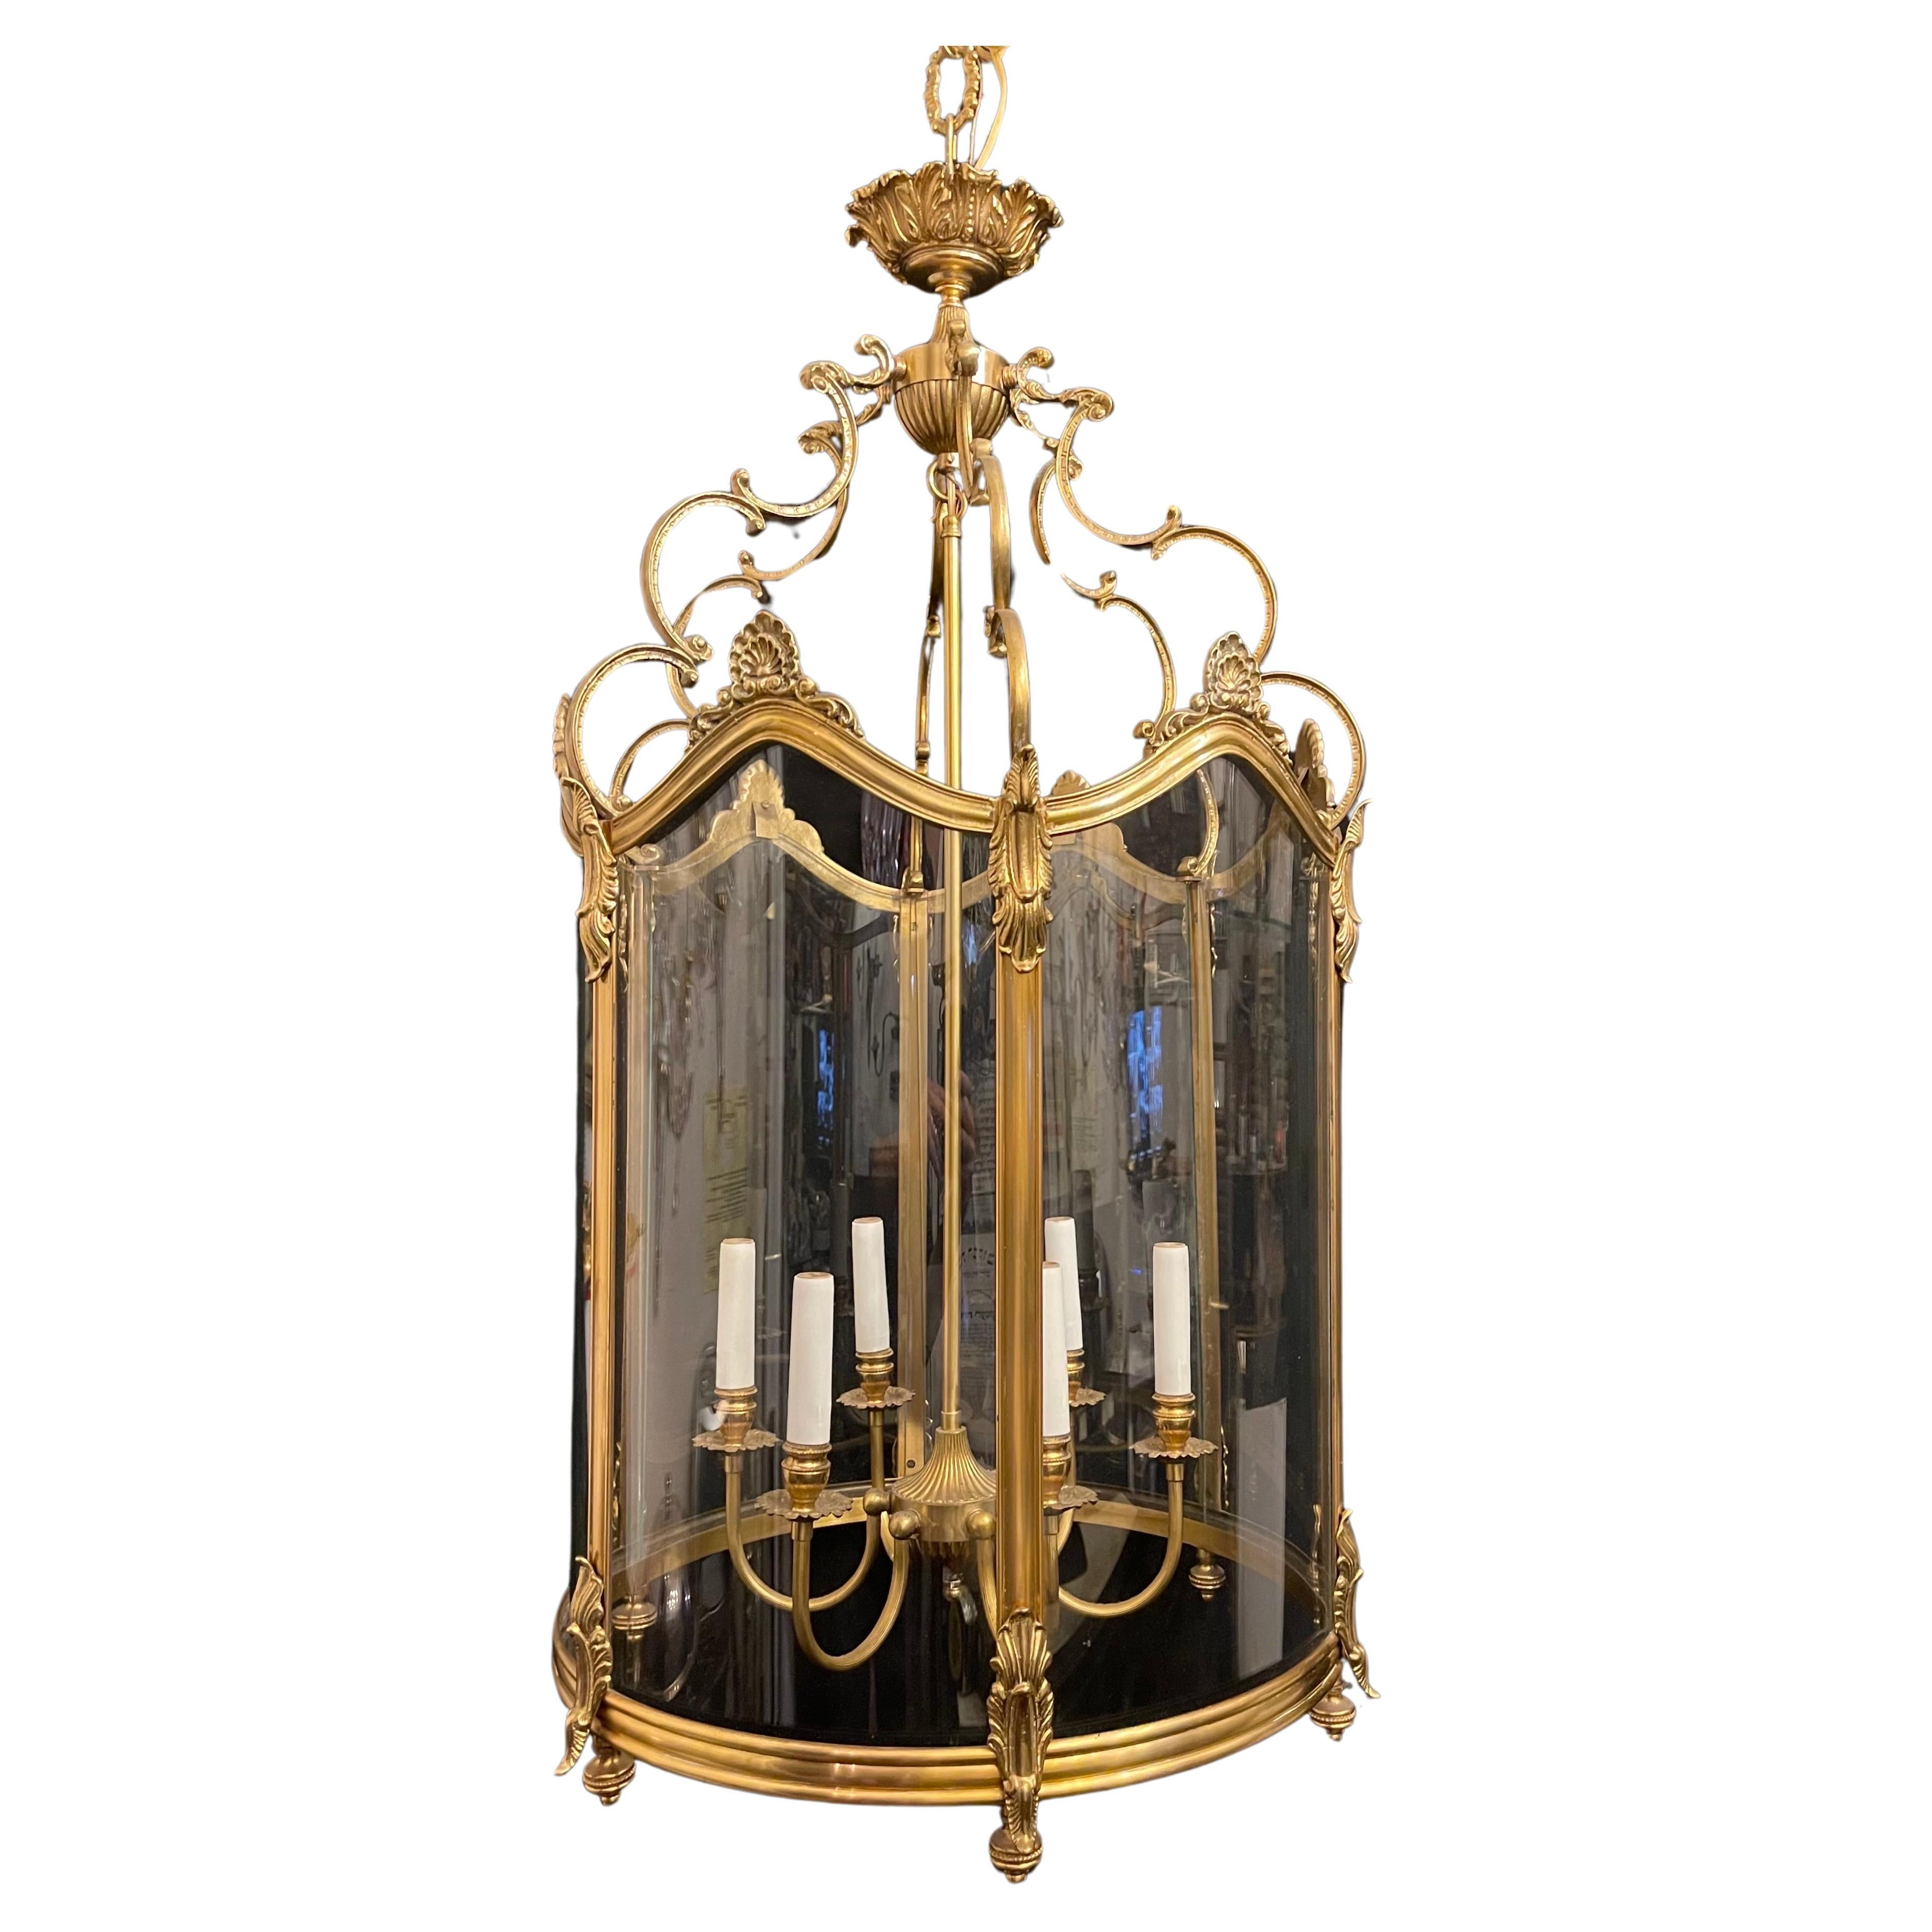 A Wonderful Large French Dore Bronze Rococo Louis XV Style With Original Bent / Curved Blown Glass 6 Candelabra Light Lantern Chandelier Fixture

Recently Rewired And Comes With Chain And Canopy